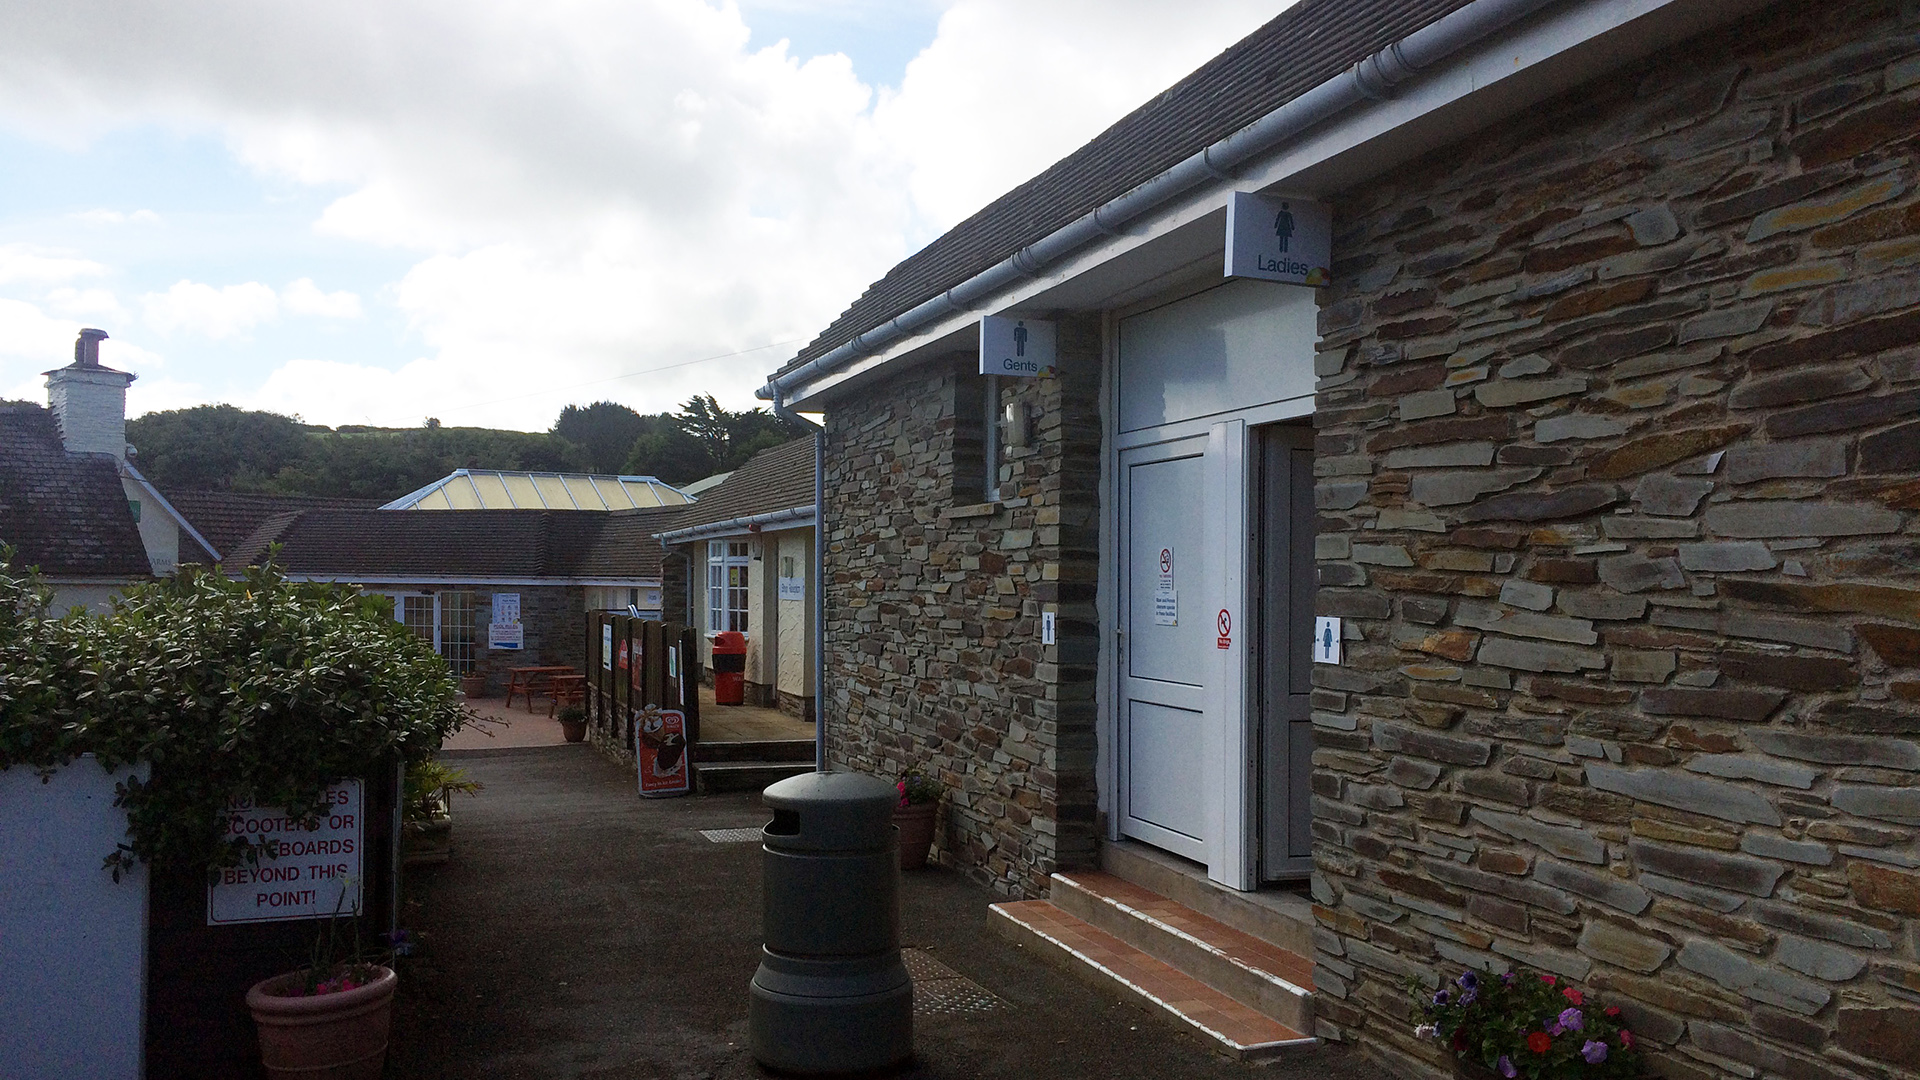 Plenty of facillities at Easewell Frm, here are the toilet and showers, further on is a swimming pool and a pub.